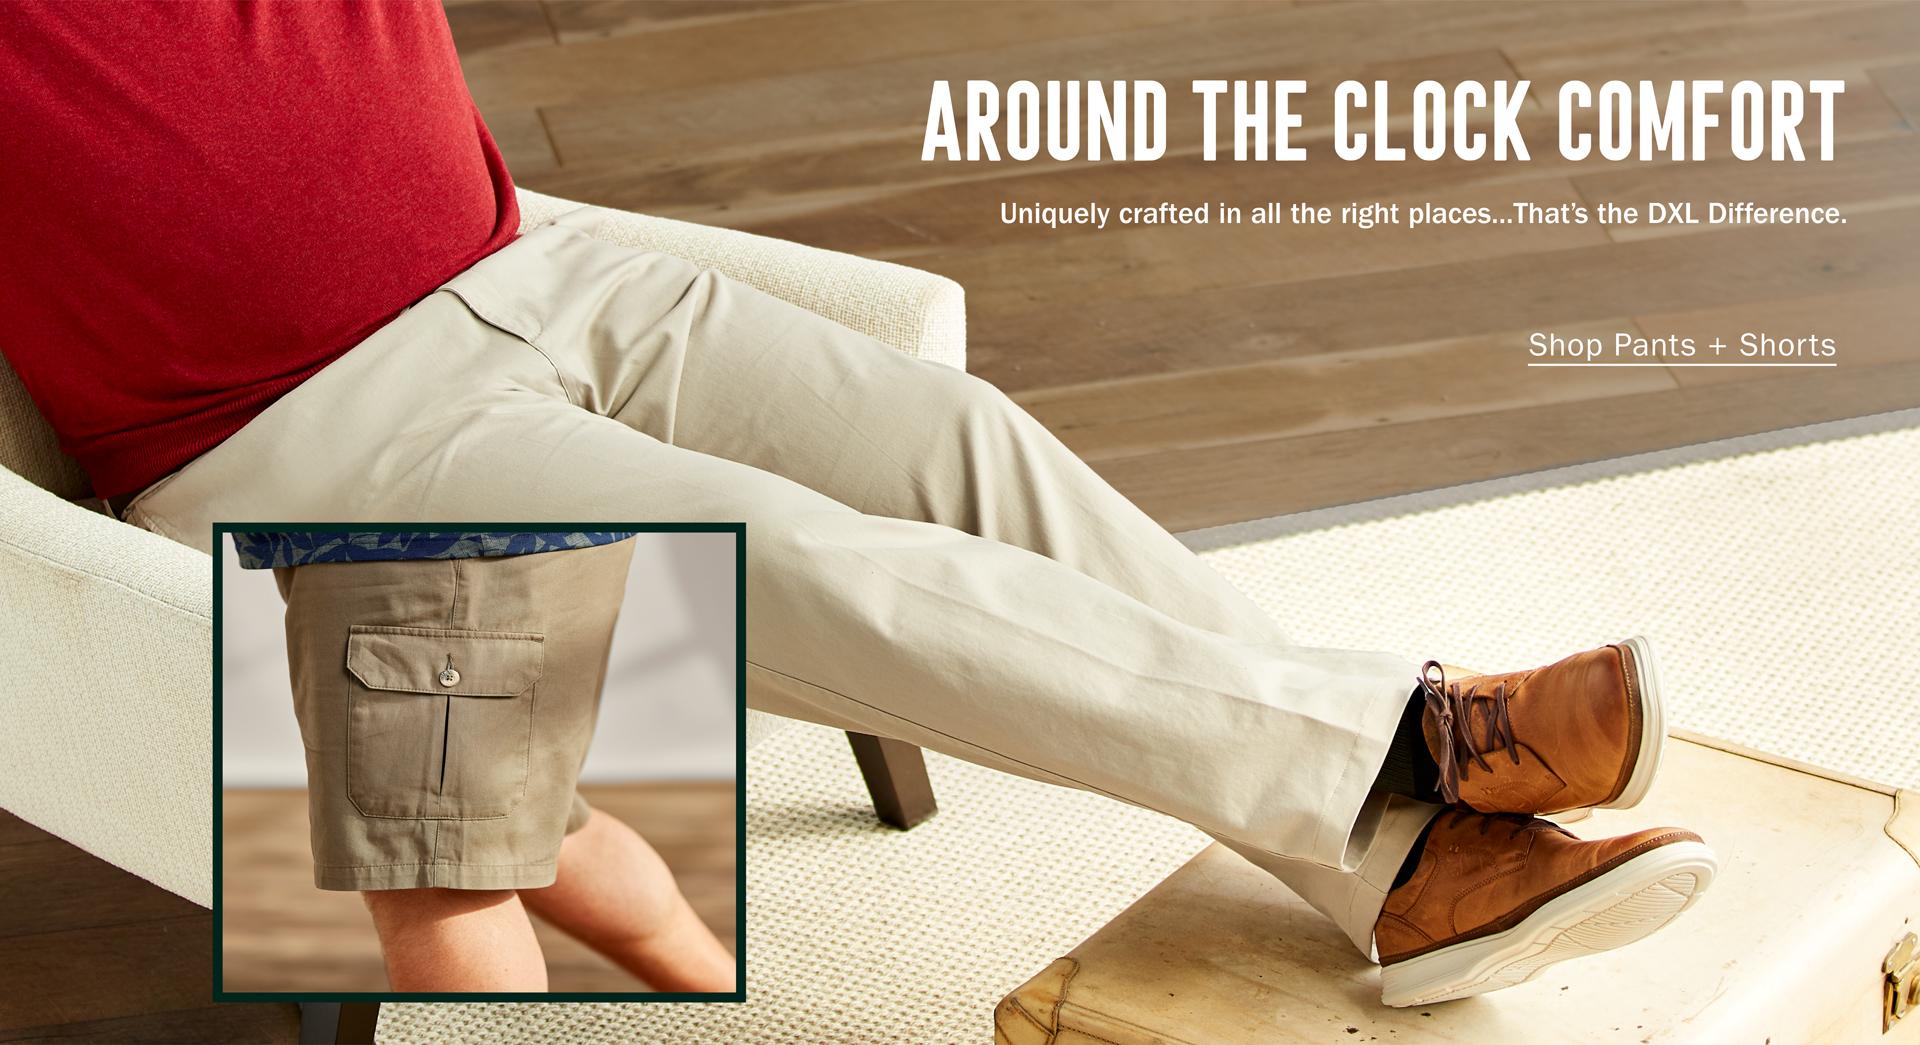 AROUND THE CLOCK COMFORT | Uniquely crafted in all the right places...That’s the DXL Difference. | Shop Pants + Shorts